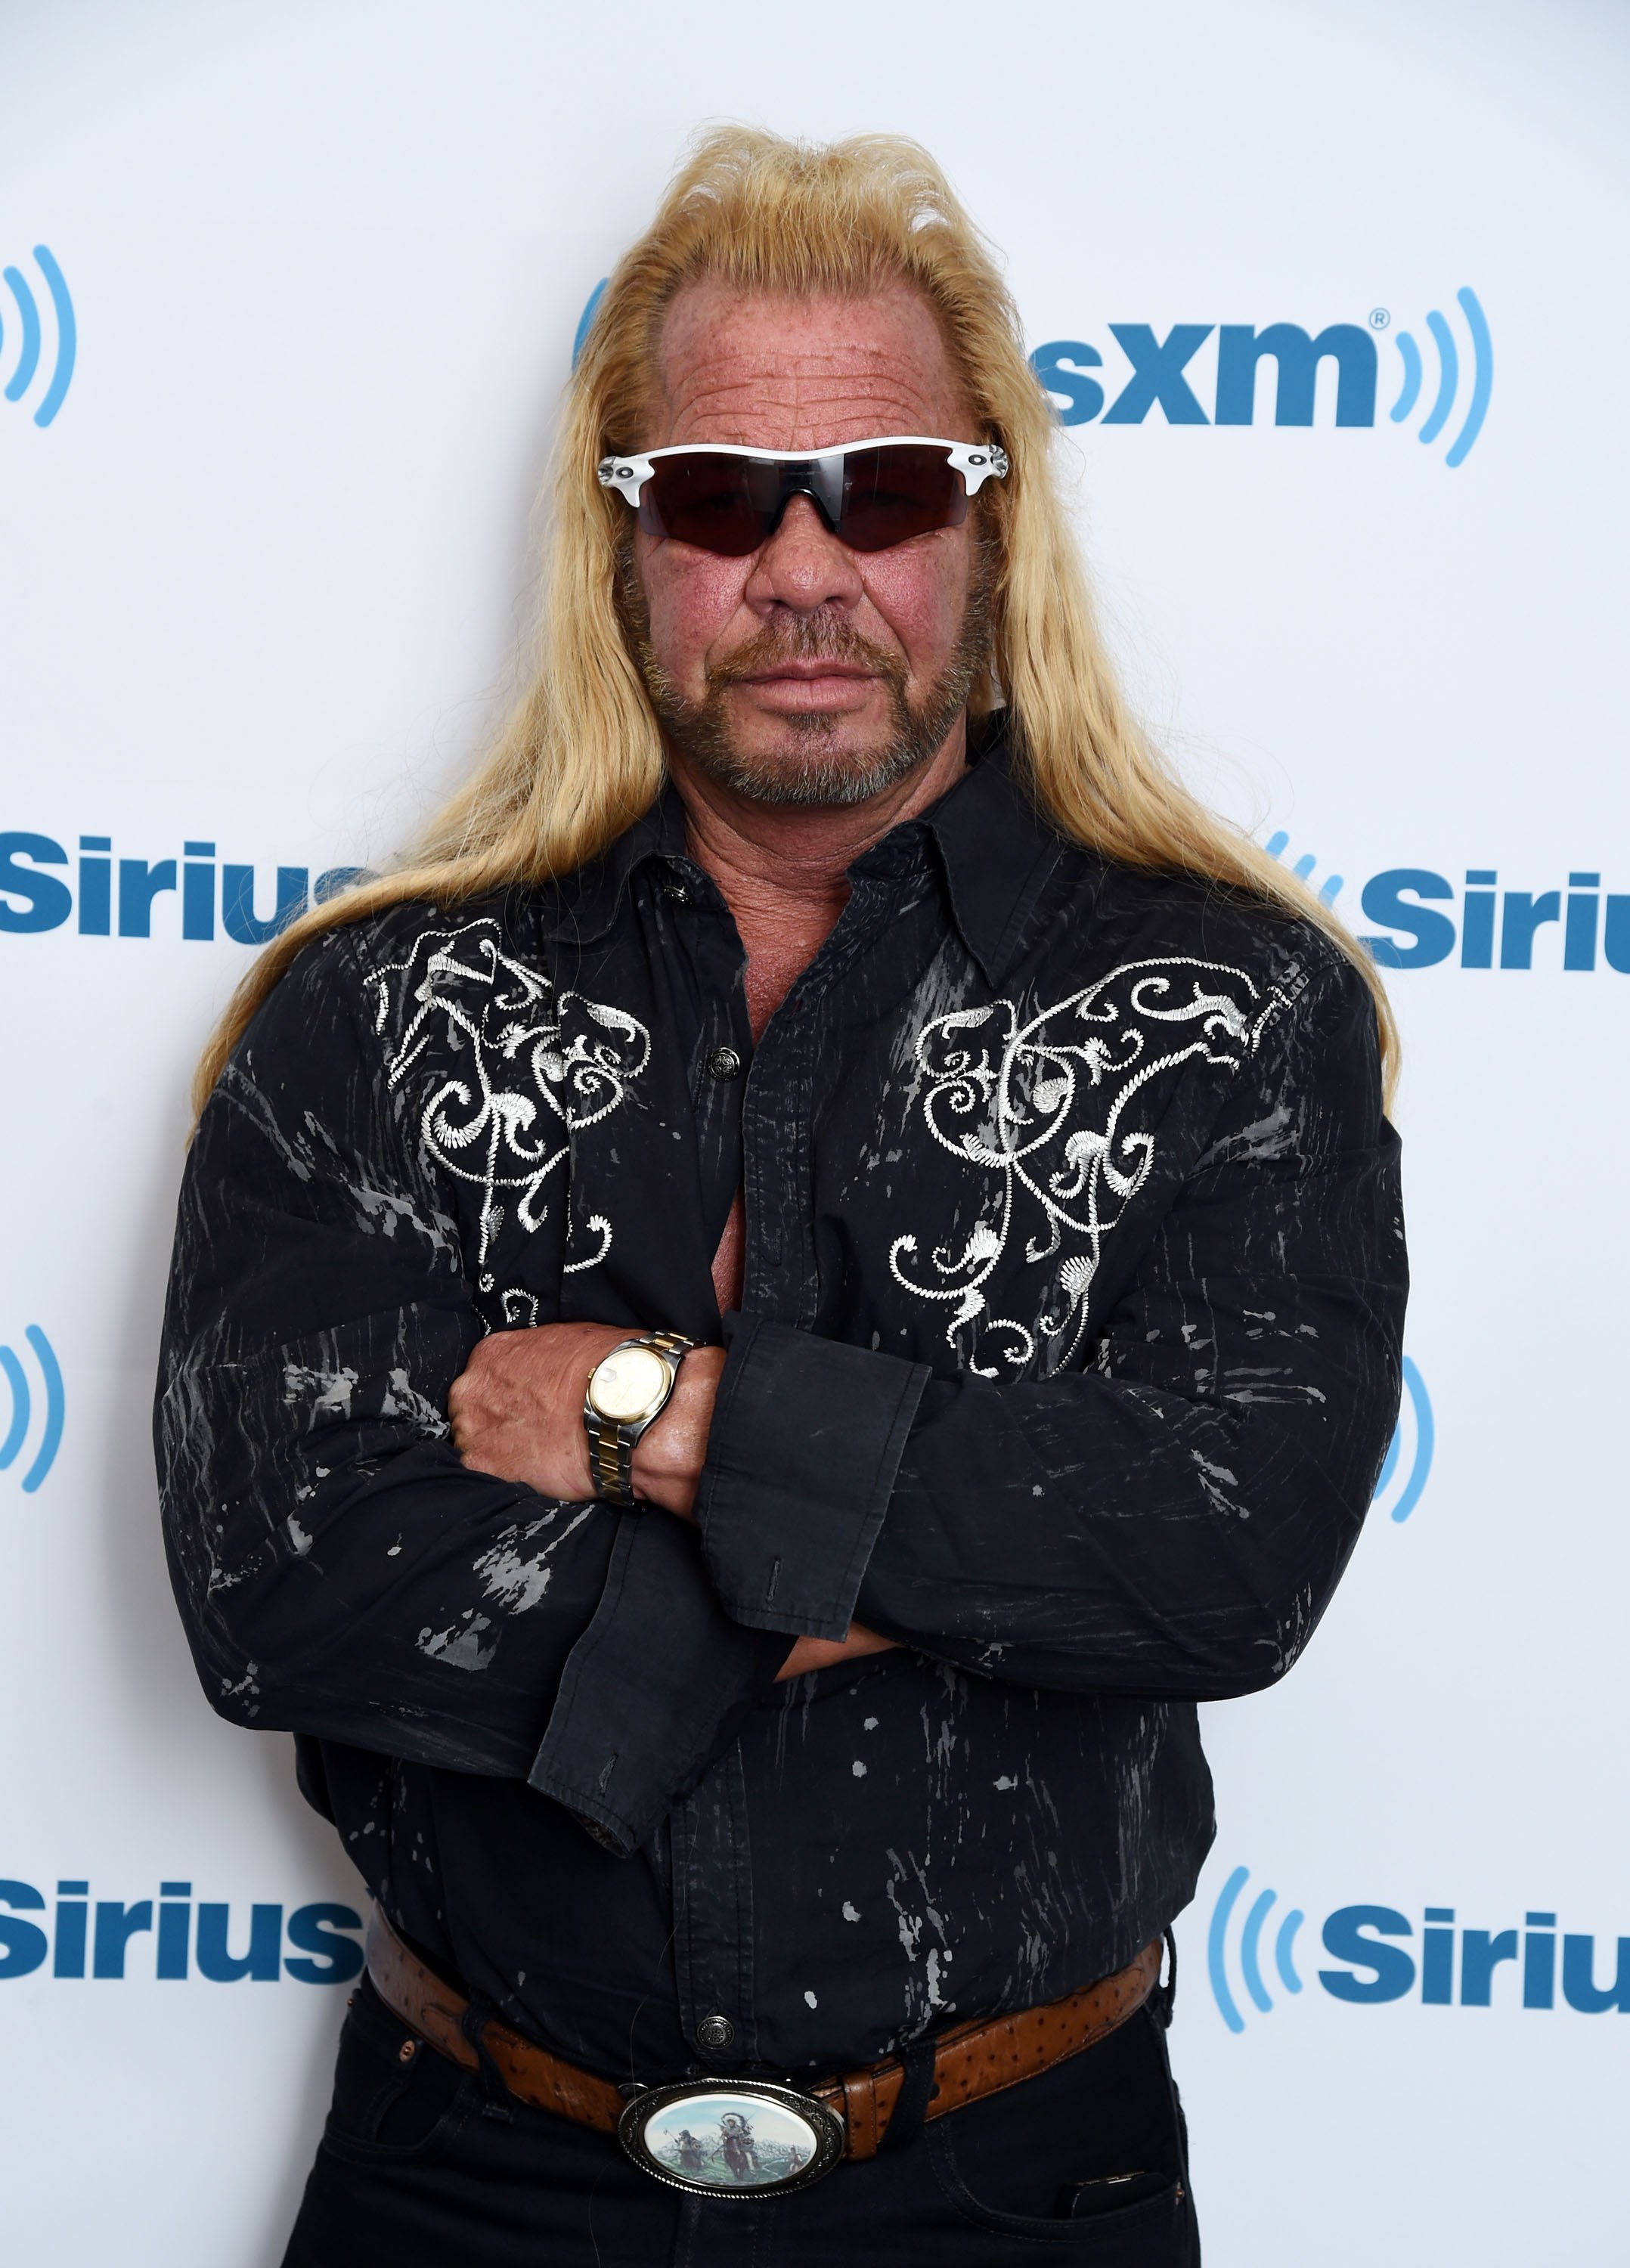 Dog the Bounty Hunter, Duane Chapman visits the SiriusXM Studios on April 24, 2015 | Photo: GettyImages